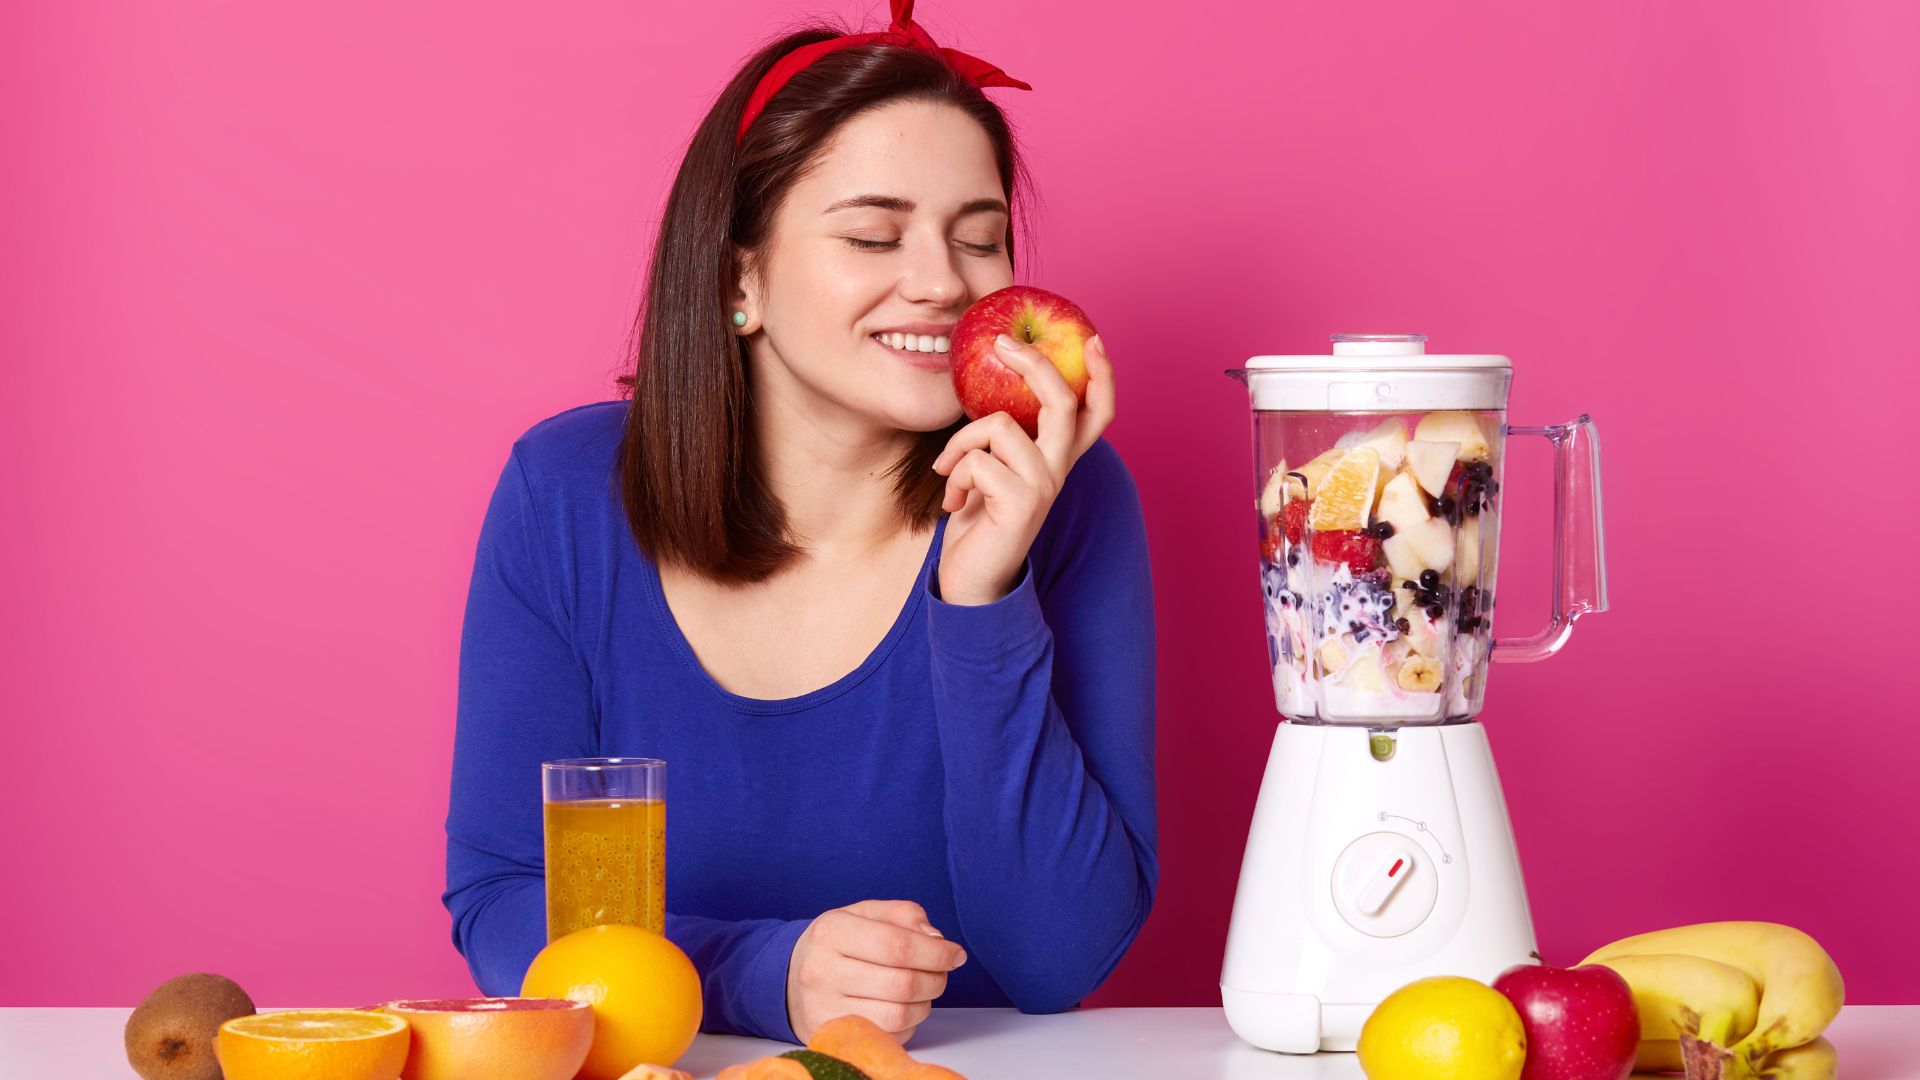 Beautiful Woman Makes a Smoothie with Blender in Kitchen. Brunet